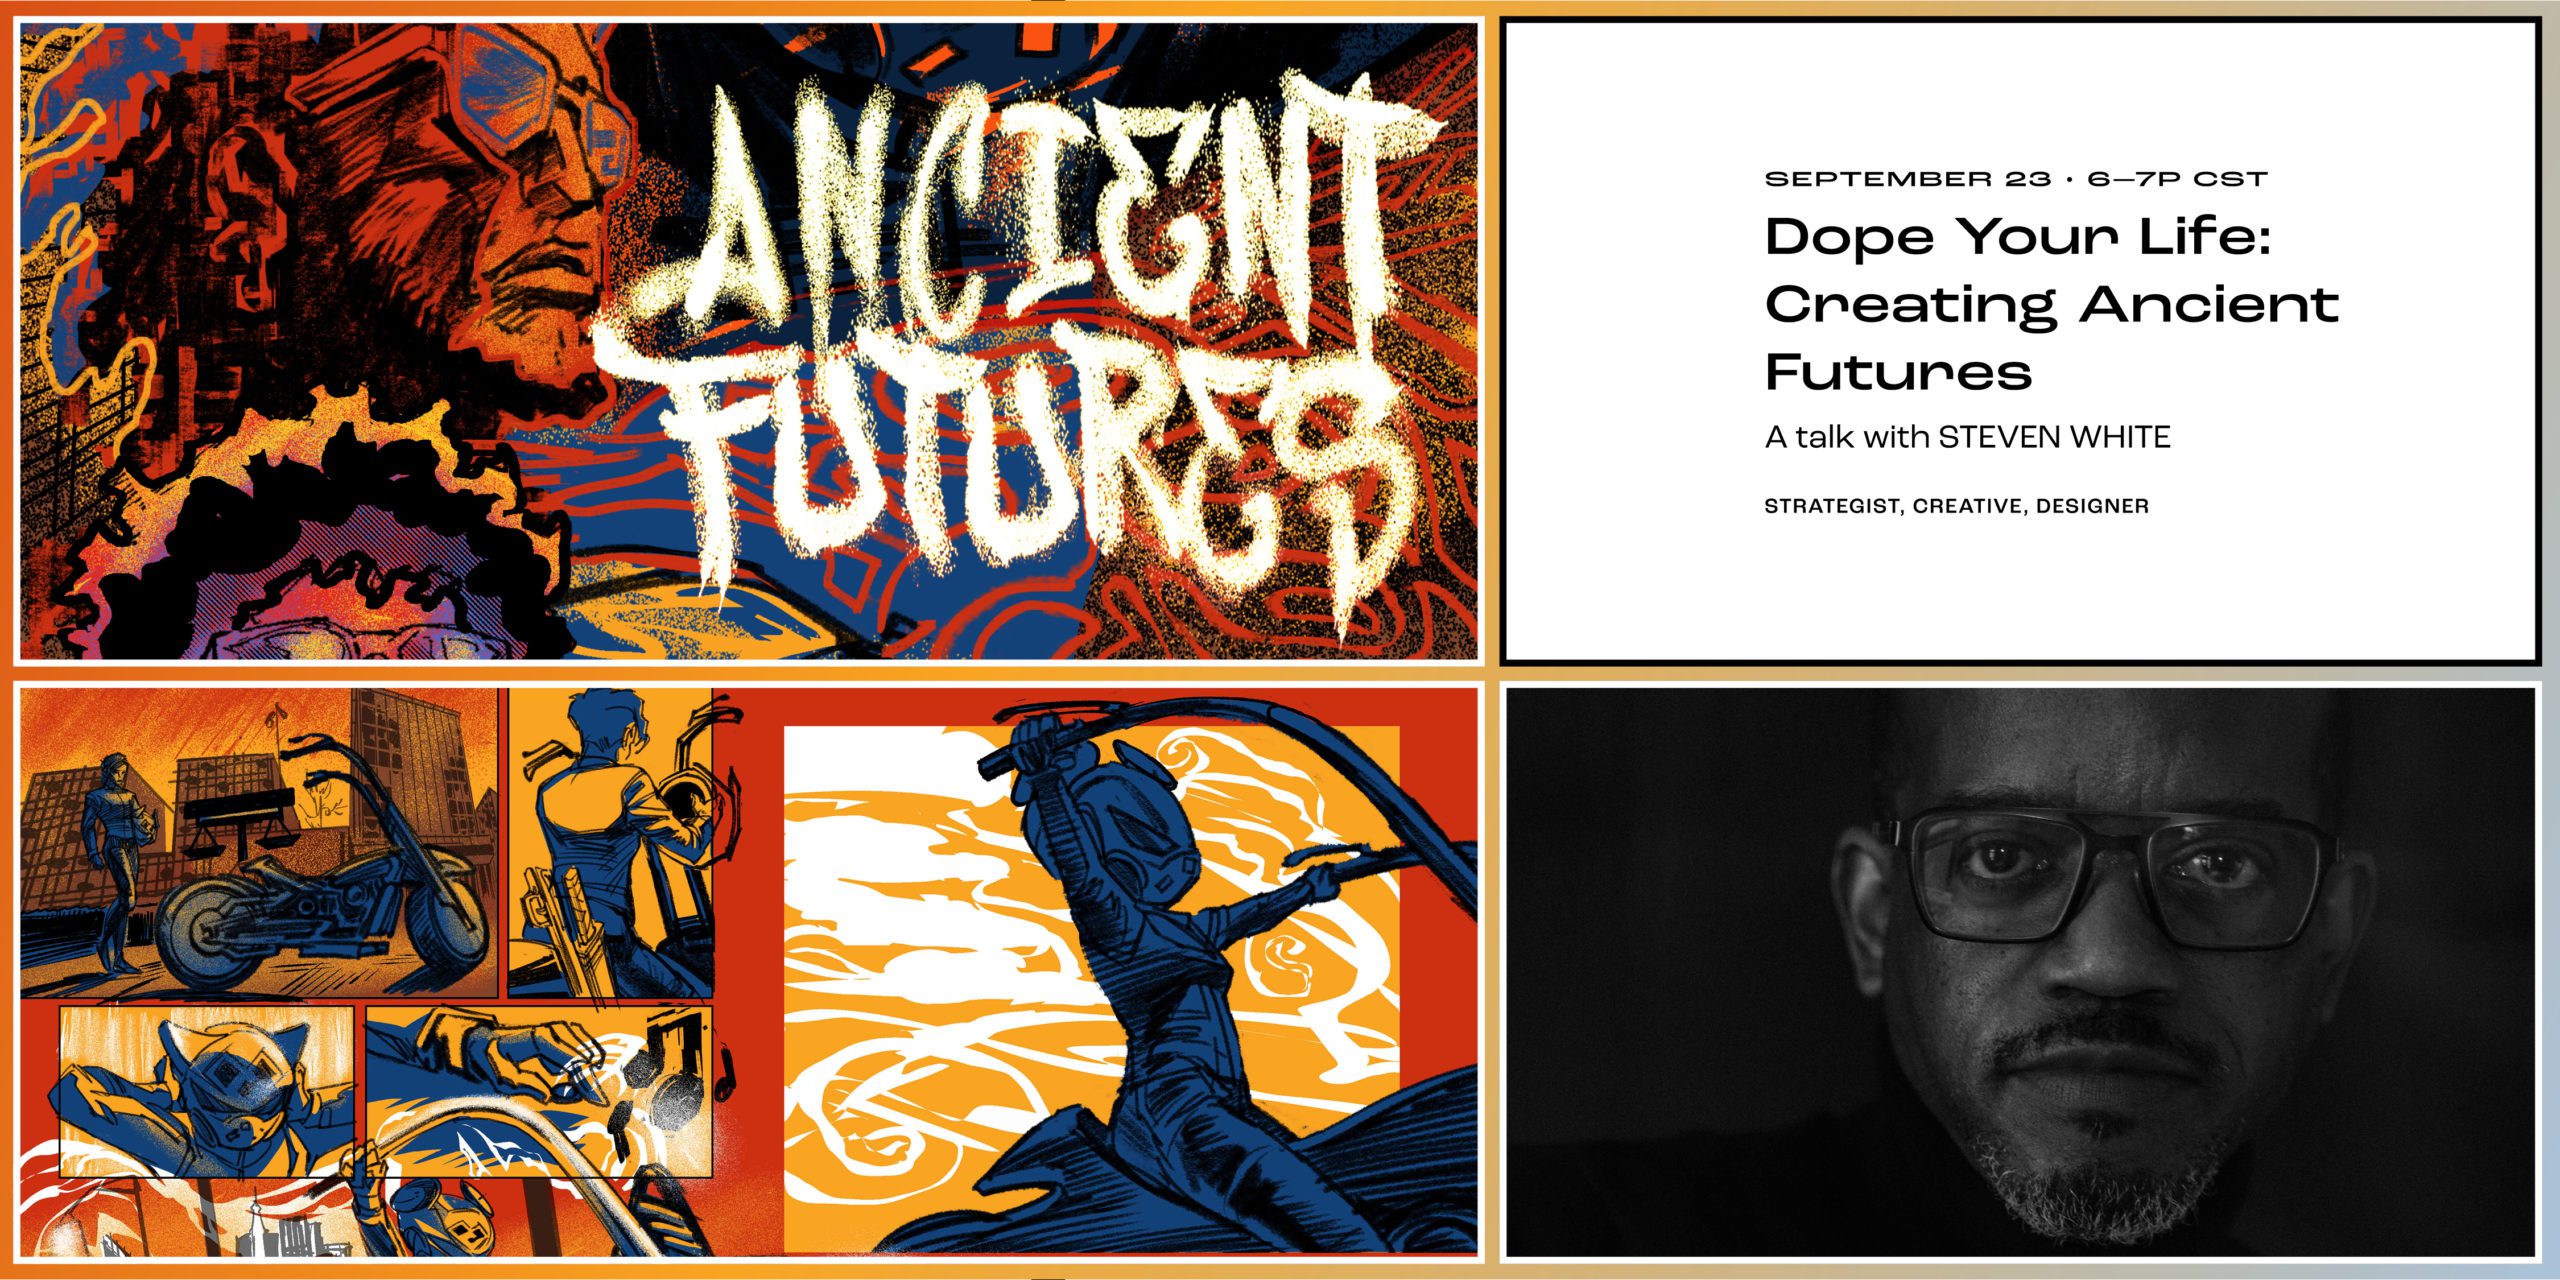 Dope Your Life: Creating Ancient Futures